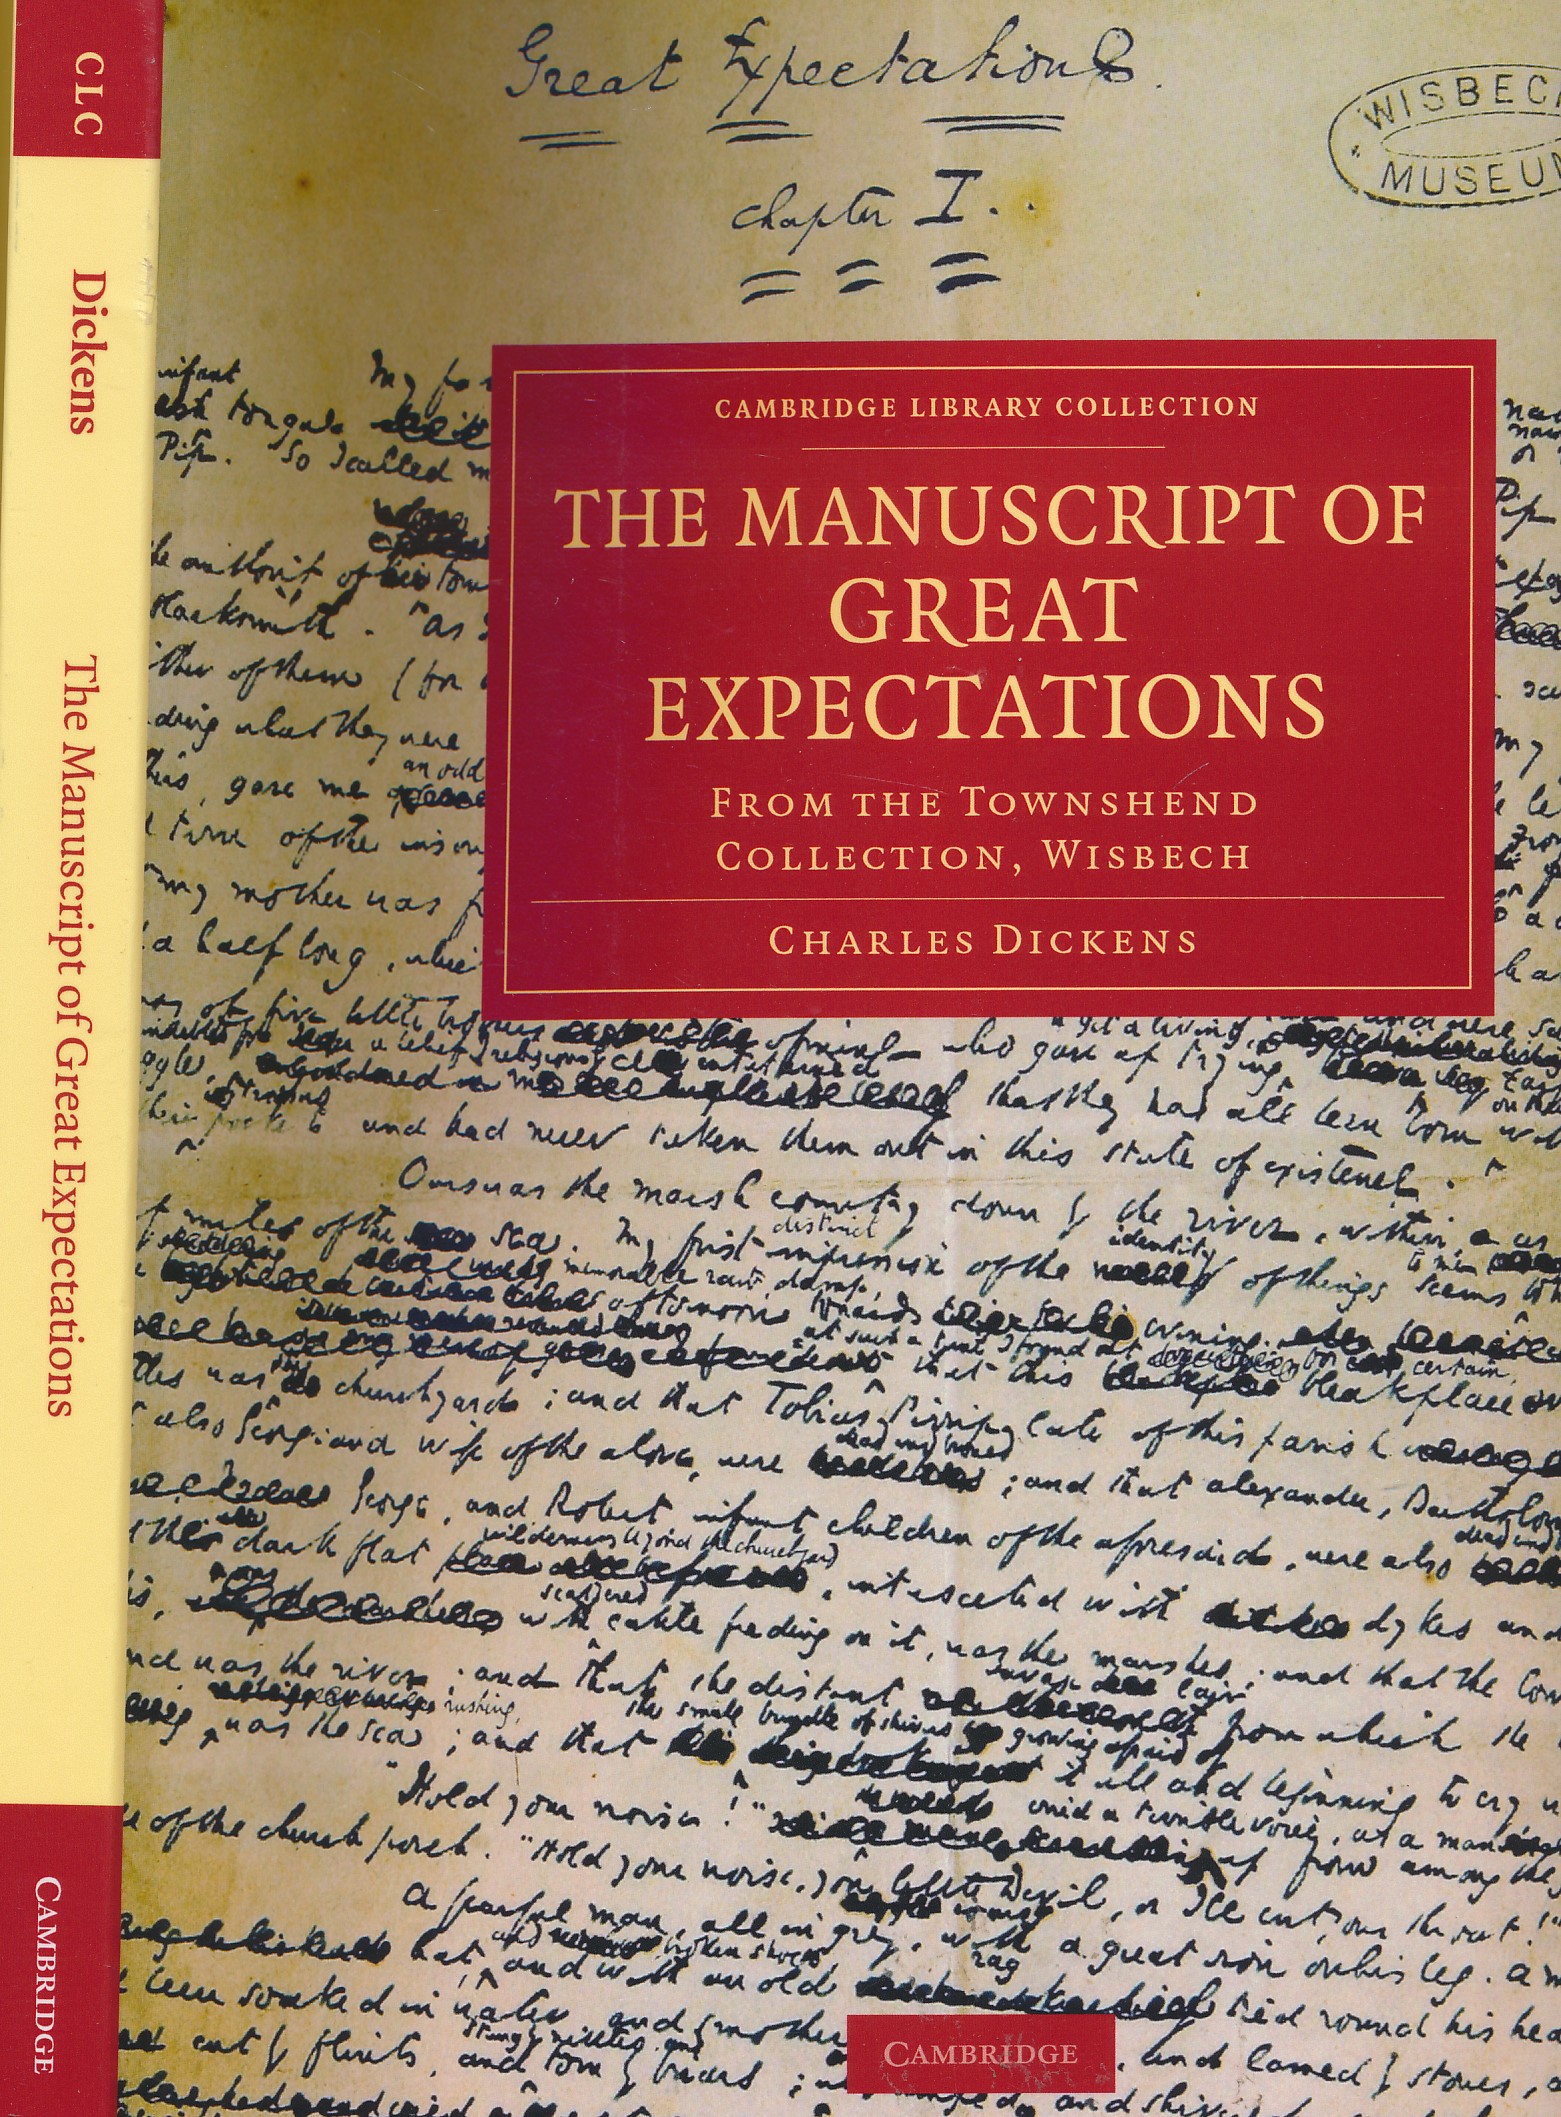 The Manuscript of Great Expectations From the Townshend Collection, Wisbech